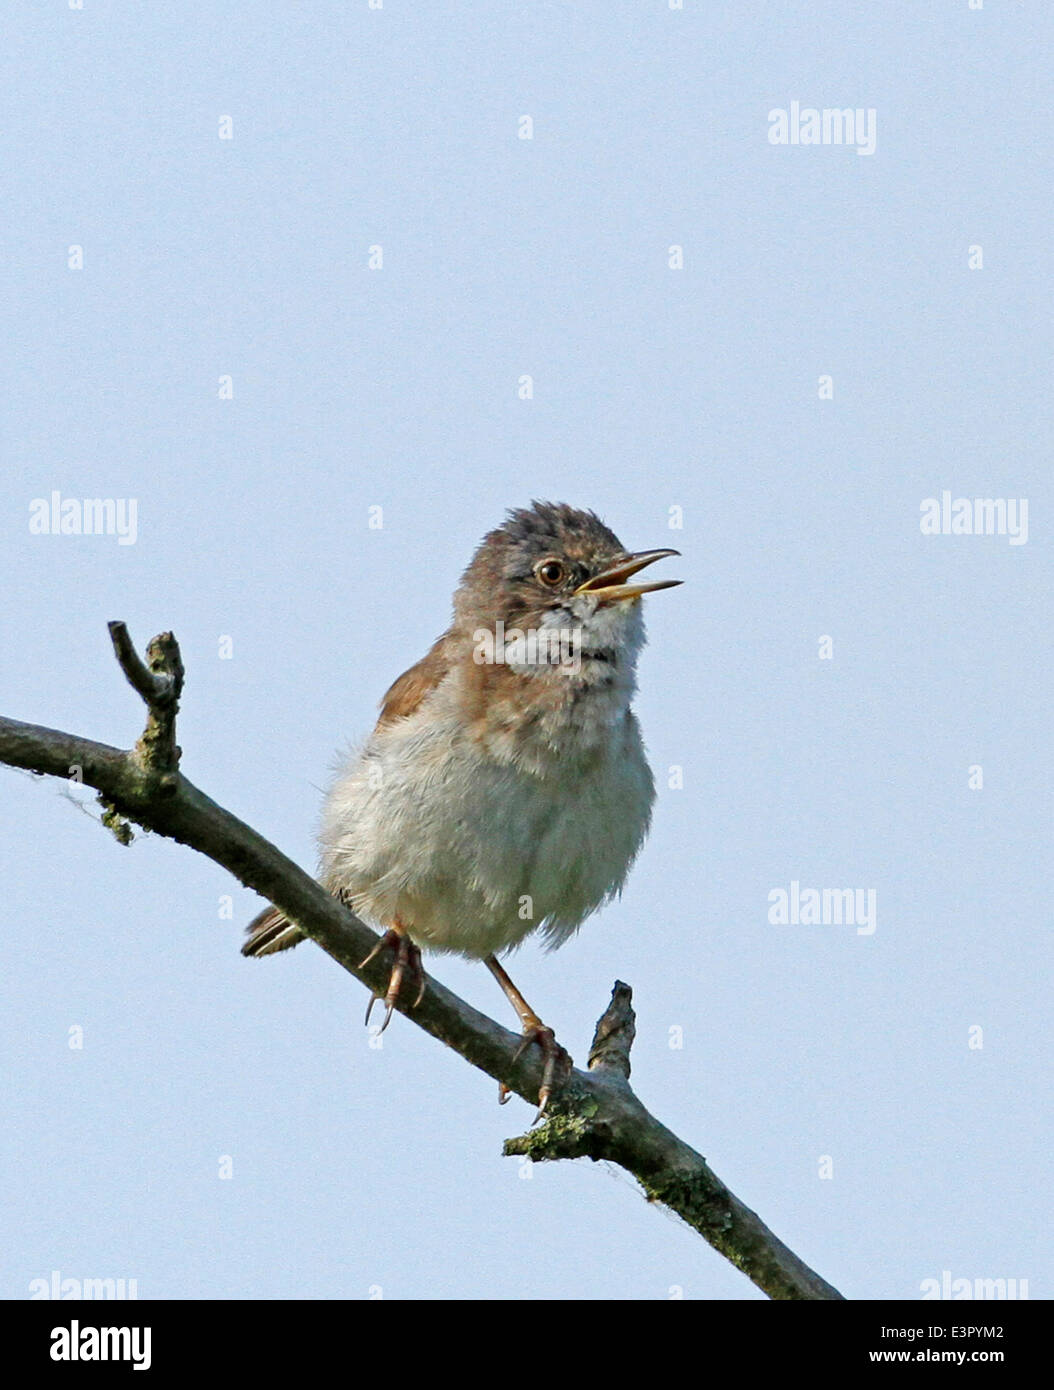 Whitethroat  Sylvia communis perched in tree Stock Photo